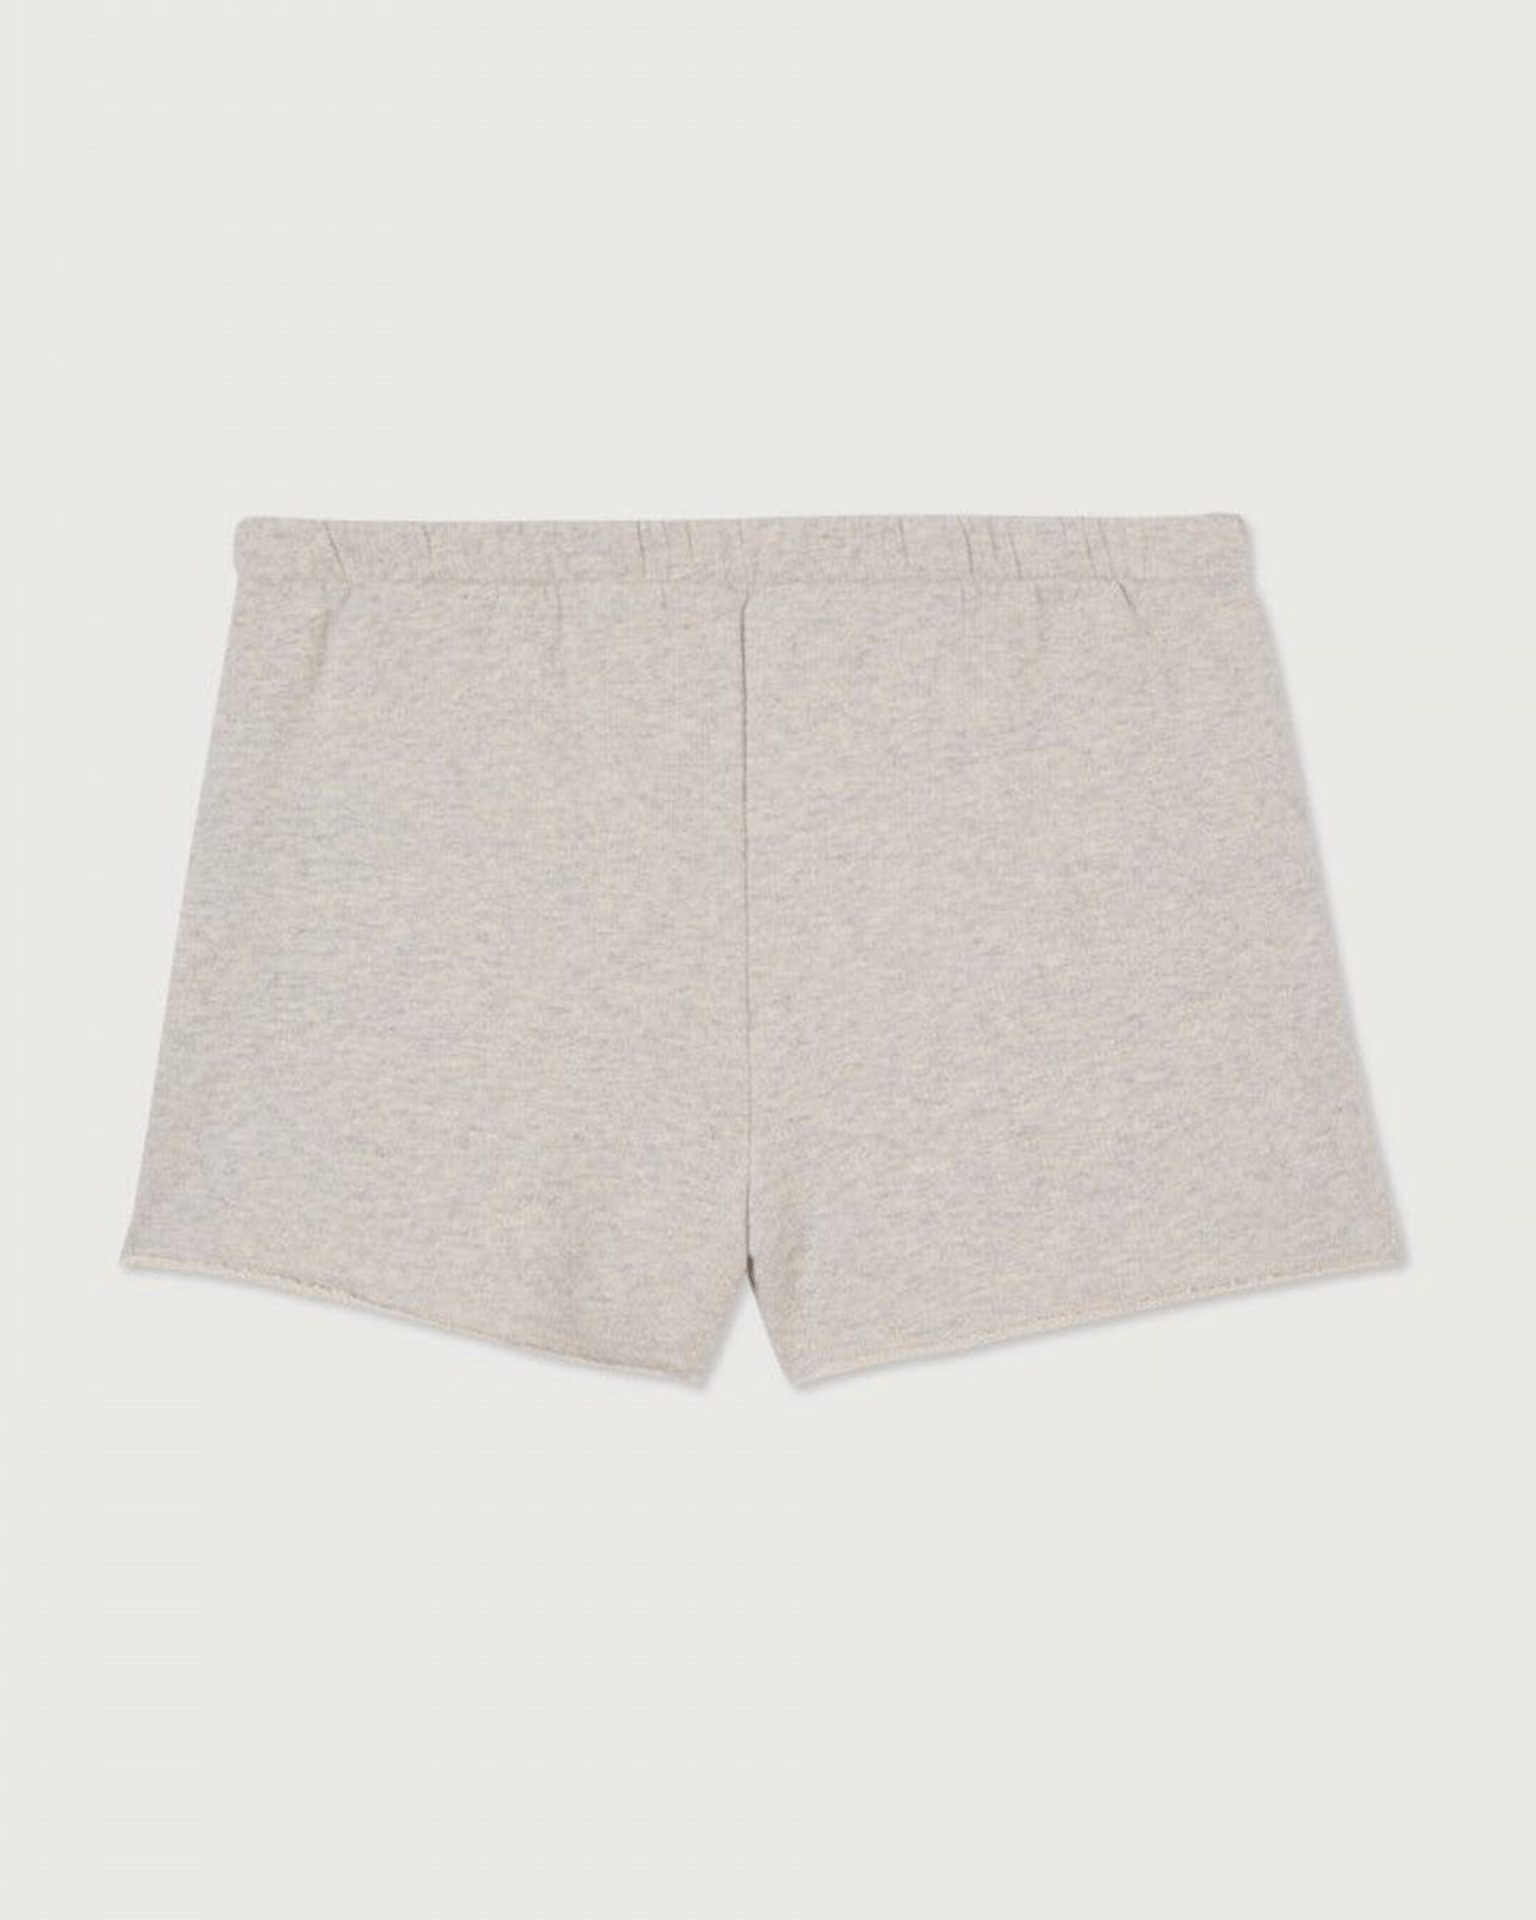 American Vintage Sweatshorts in Gris Clair - Bliss Boutiques